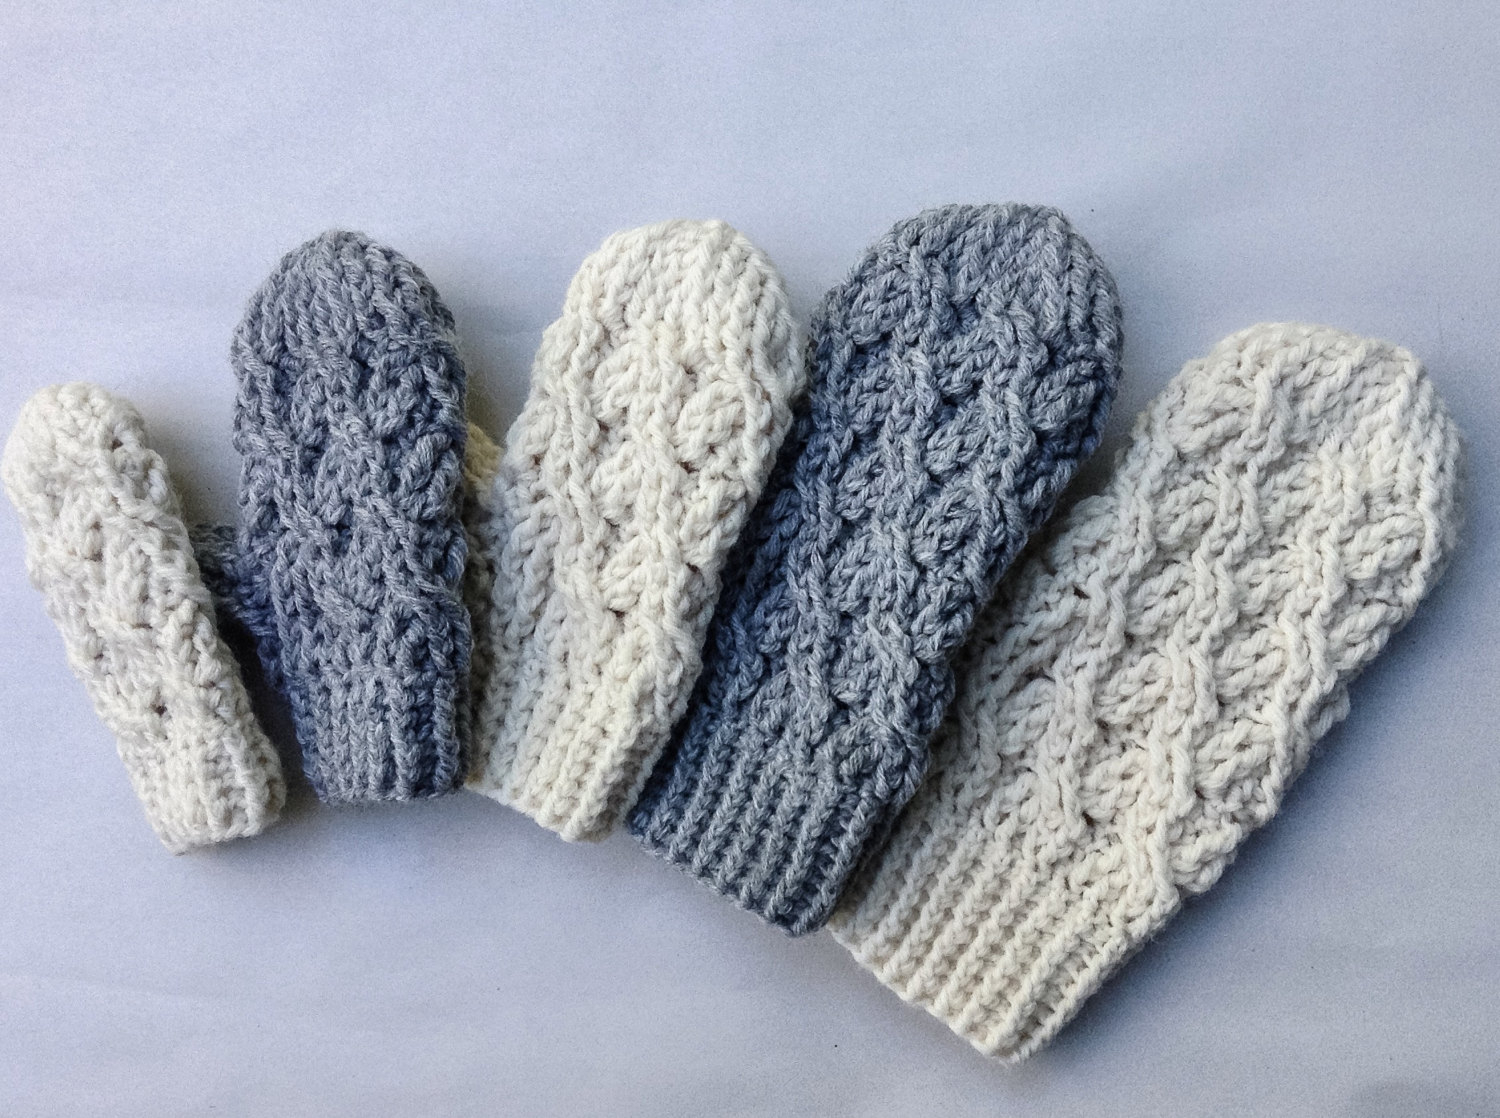 Crochet Mitten Pattern Crochet Pattern Crochet Mitten Pattern The Cadence Mittens Etsy